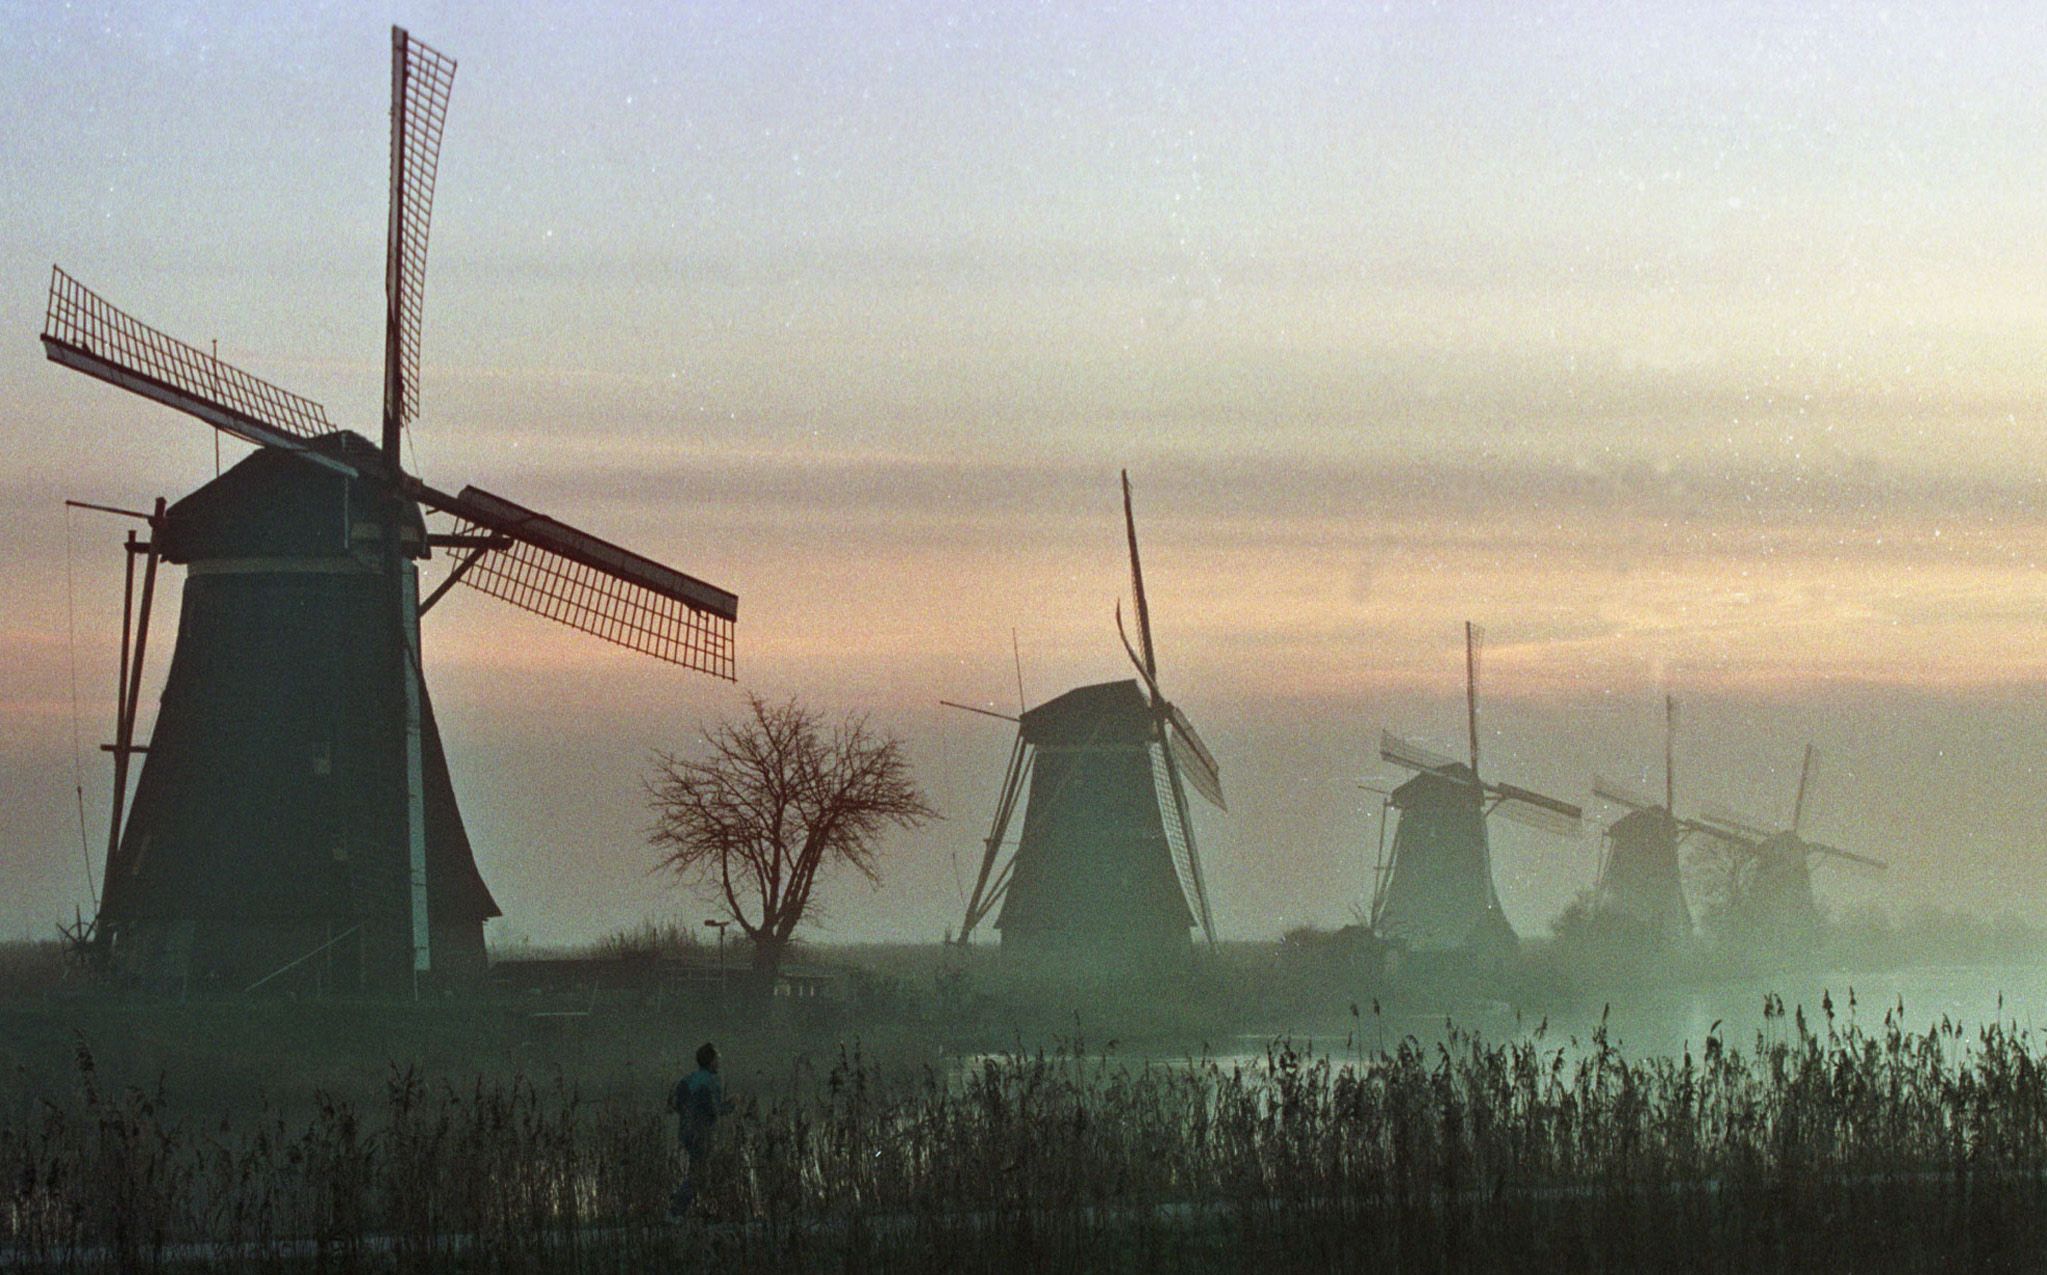 The Netherlands is known for windmills, but it produces very little ...